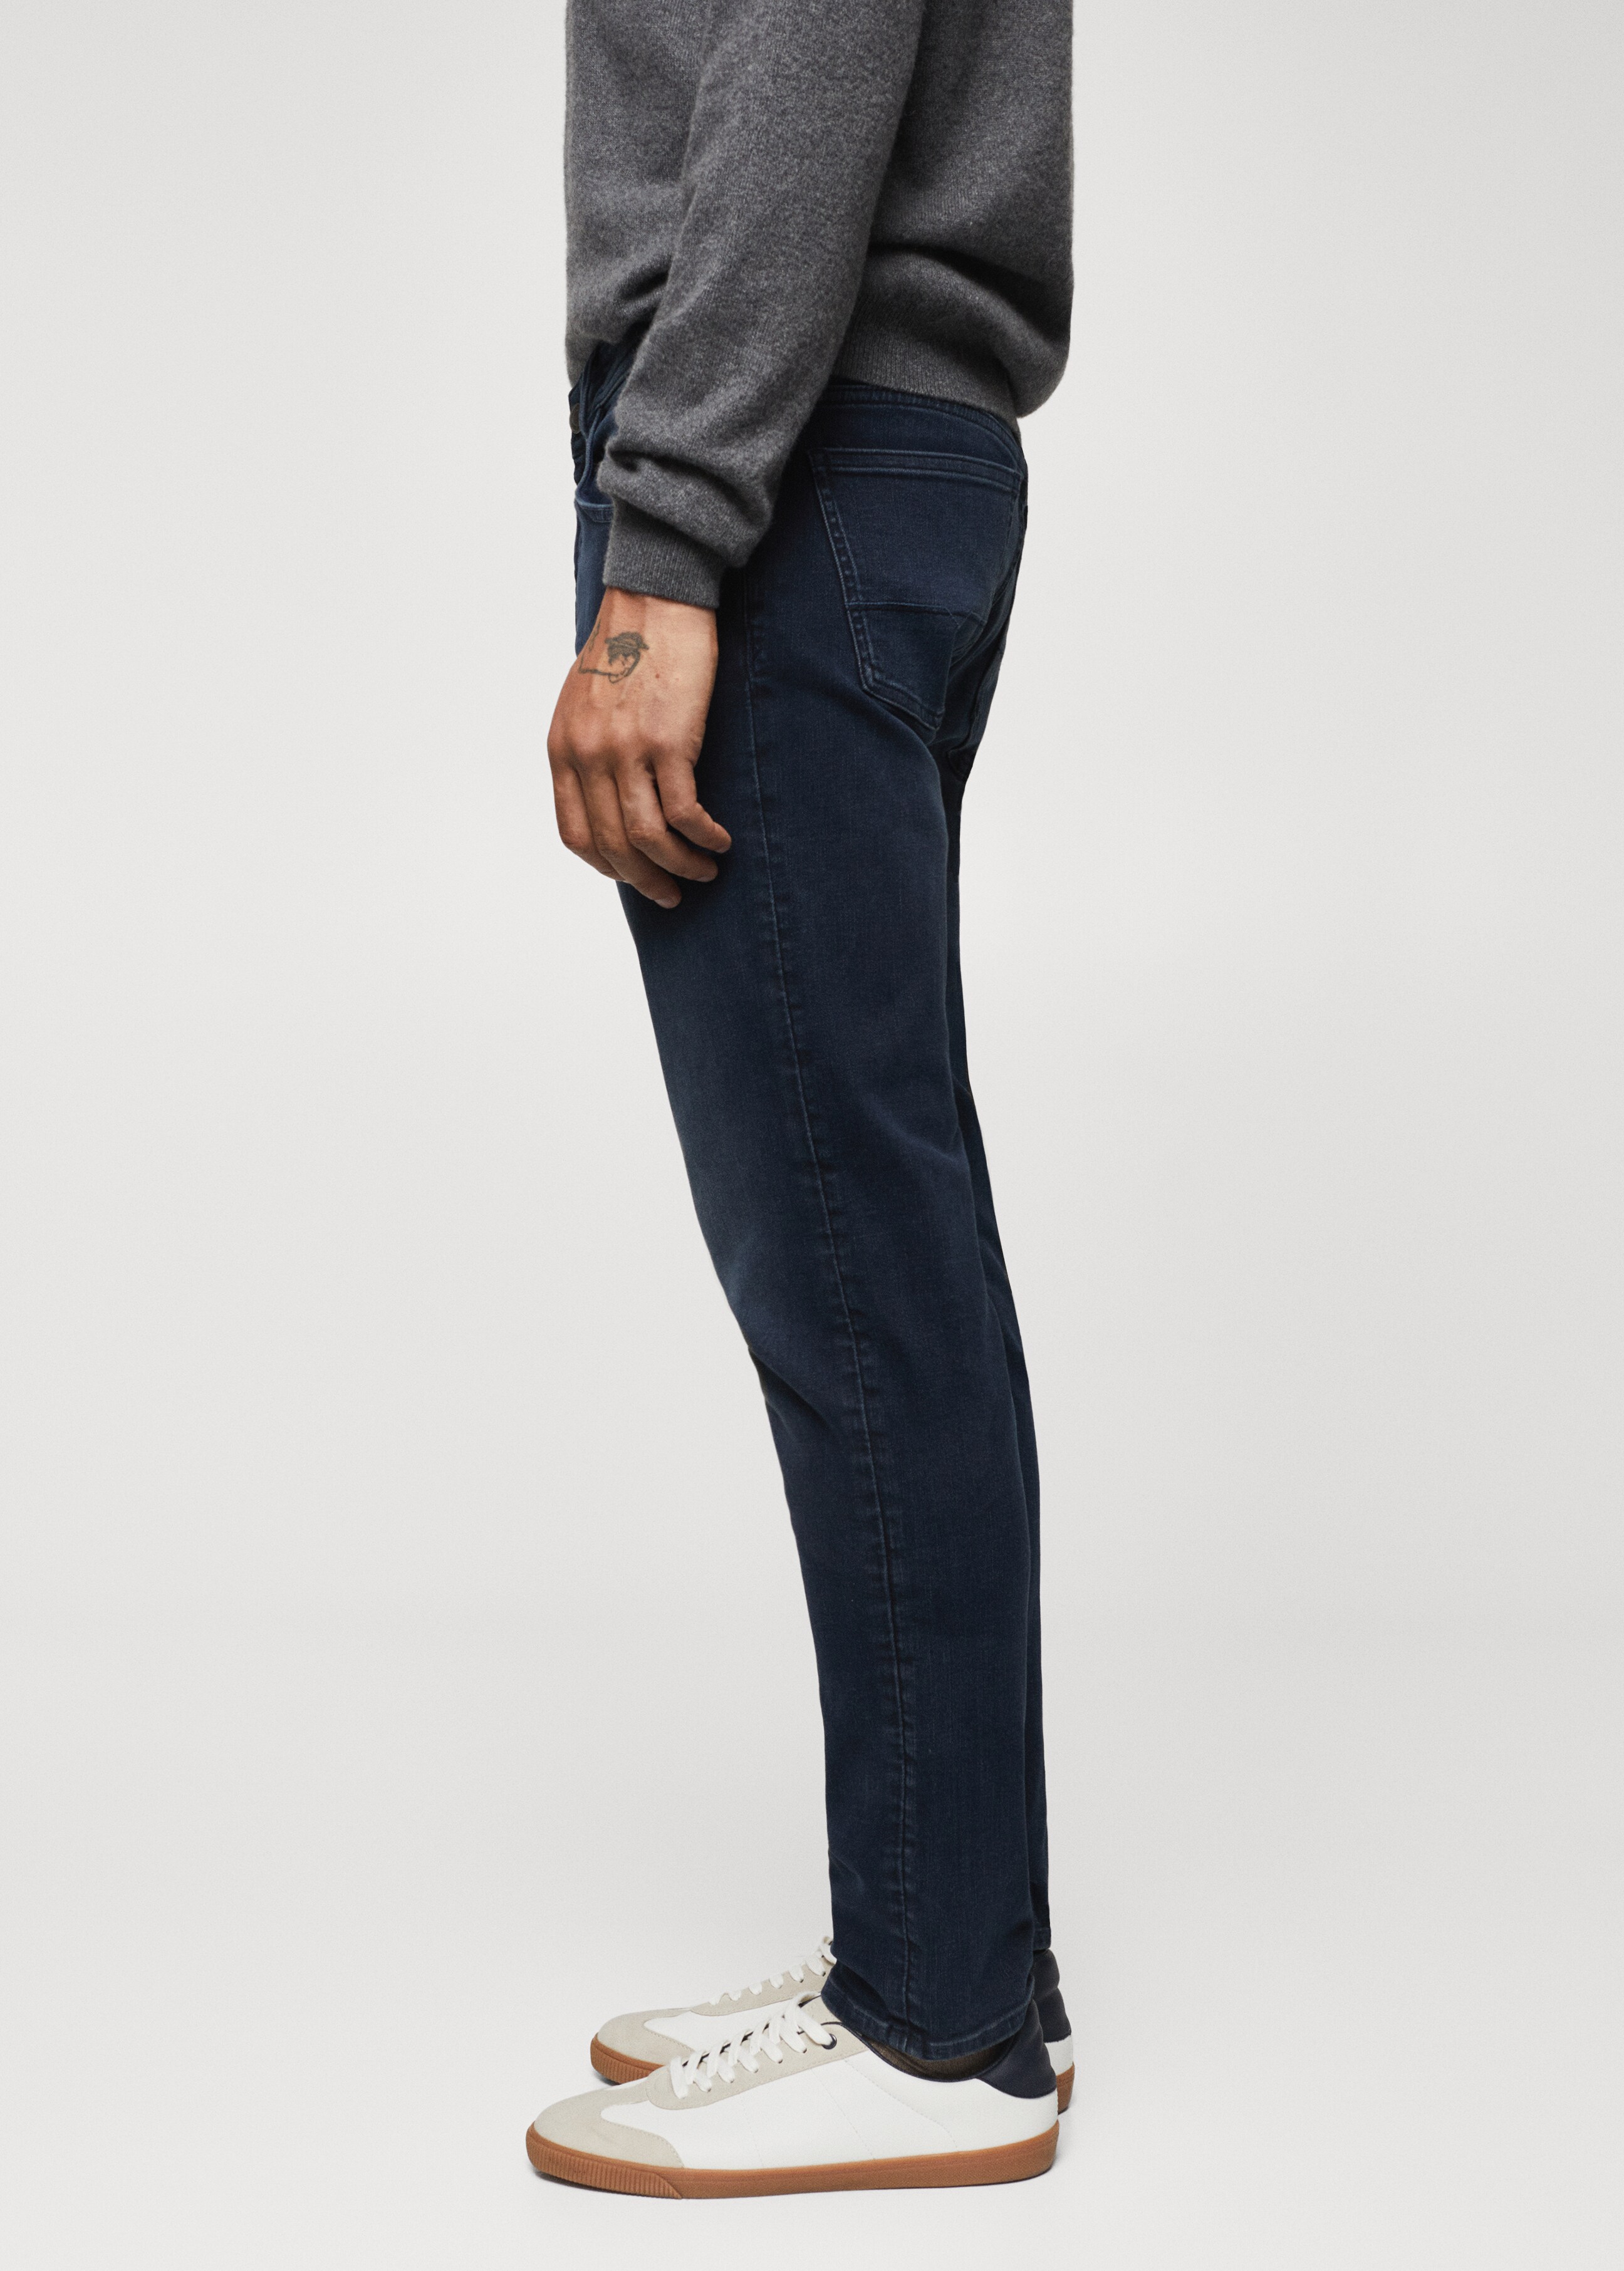 Premium skinny jeans - Details of the article 4